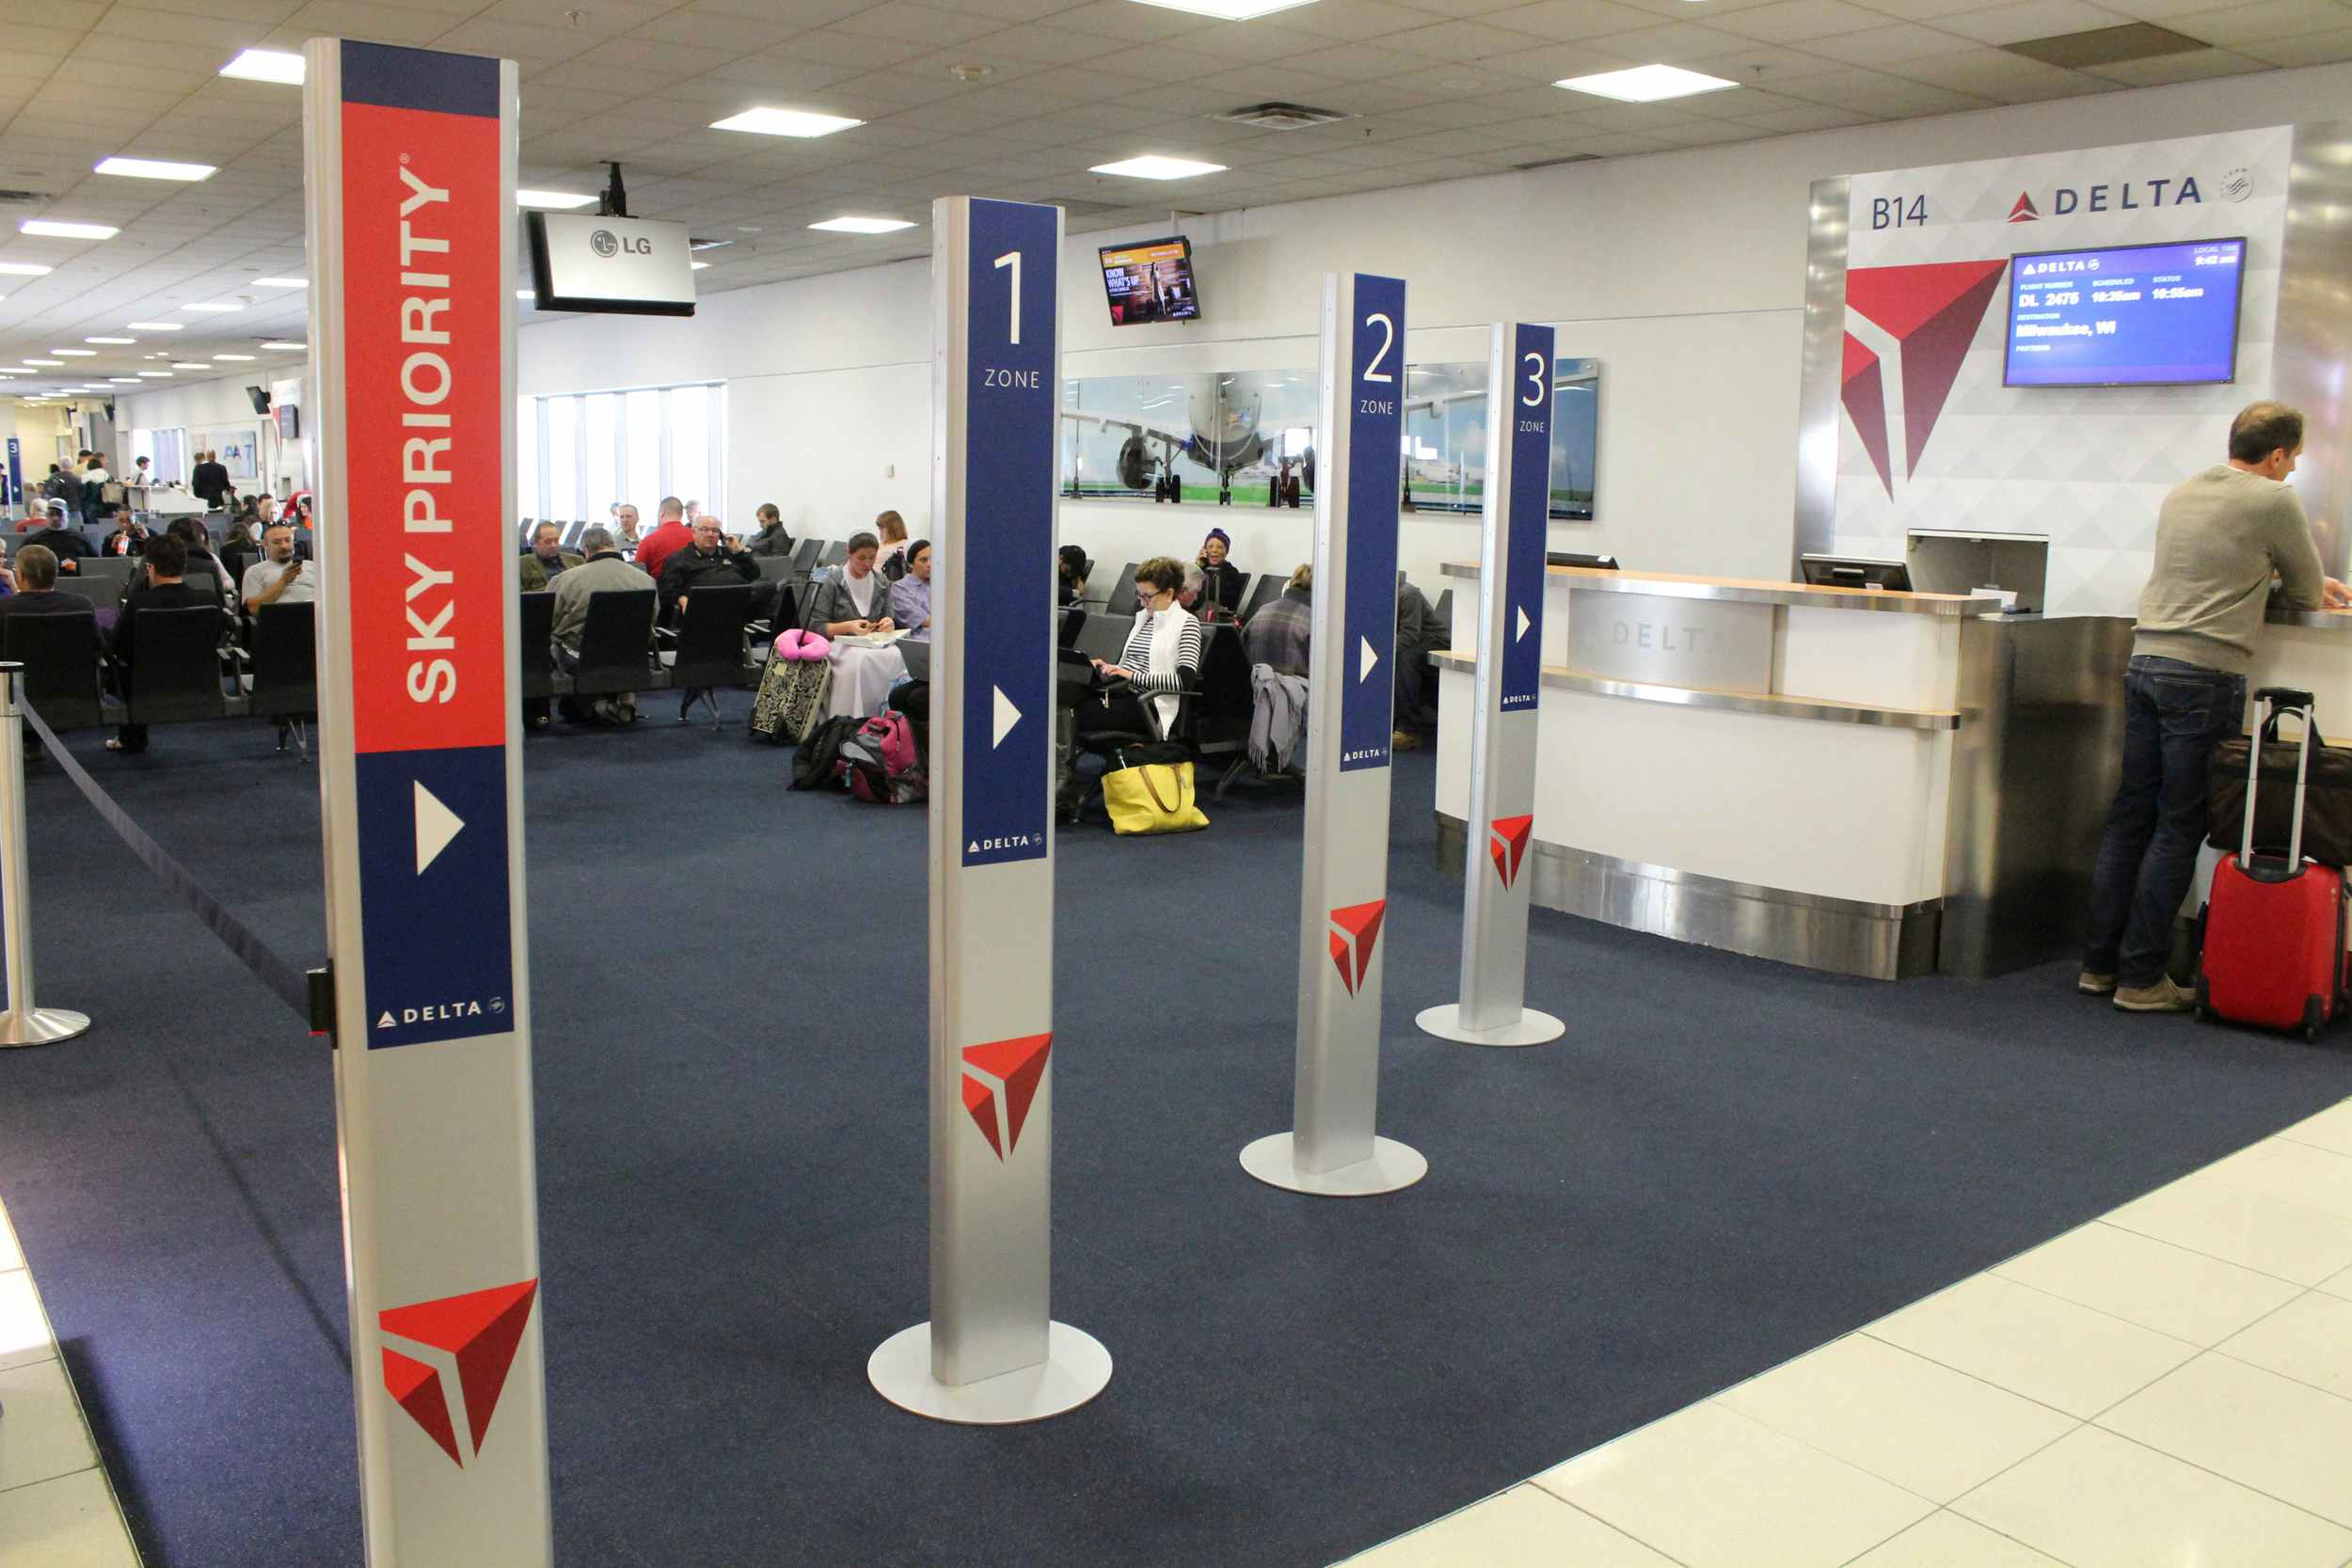 A Delta gate desk next to Sky Priority and zone signs.